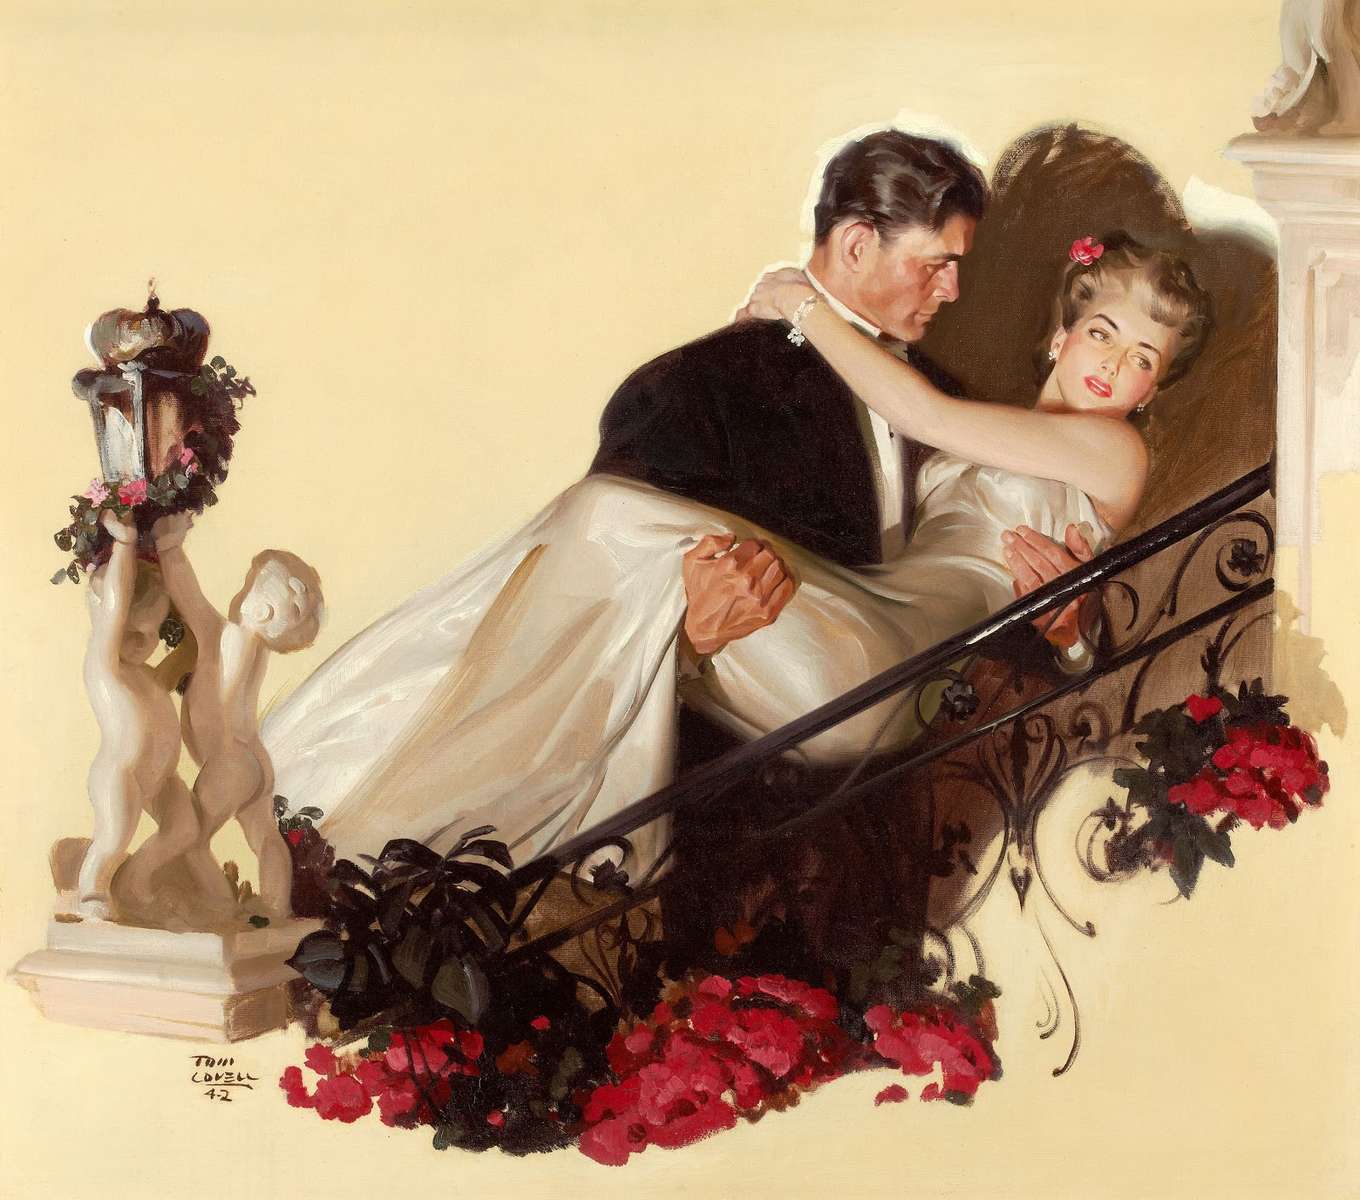 Tom Lovell "Up the Staircase (1942)" online παζλ